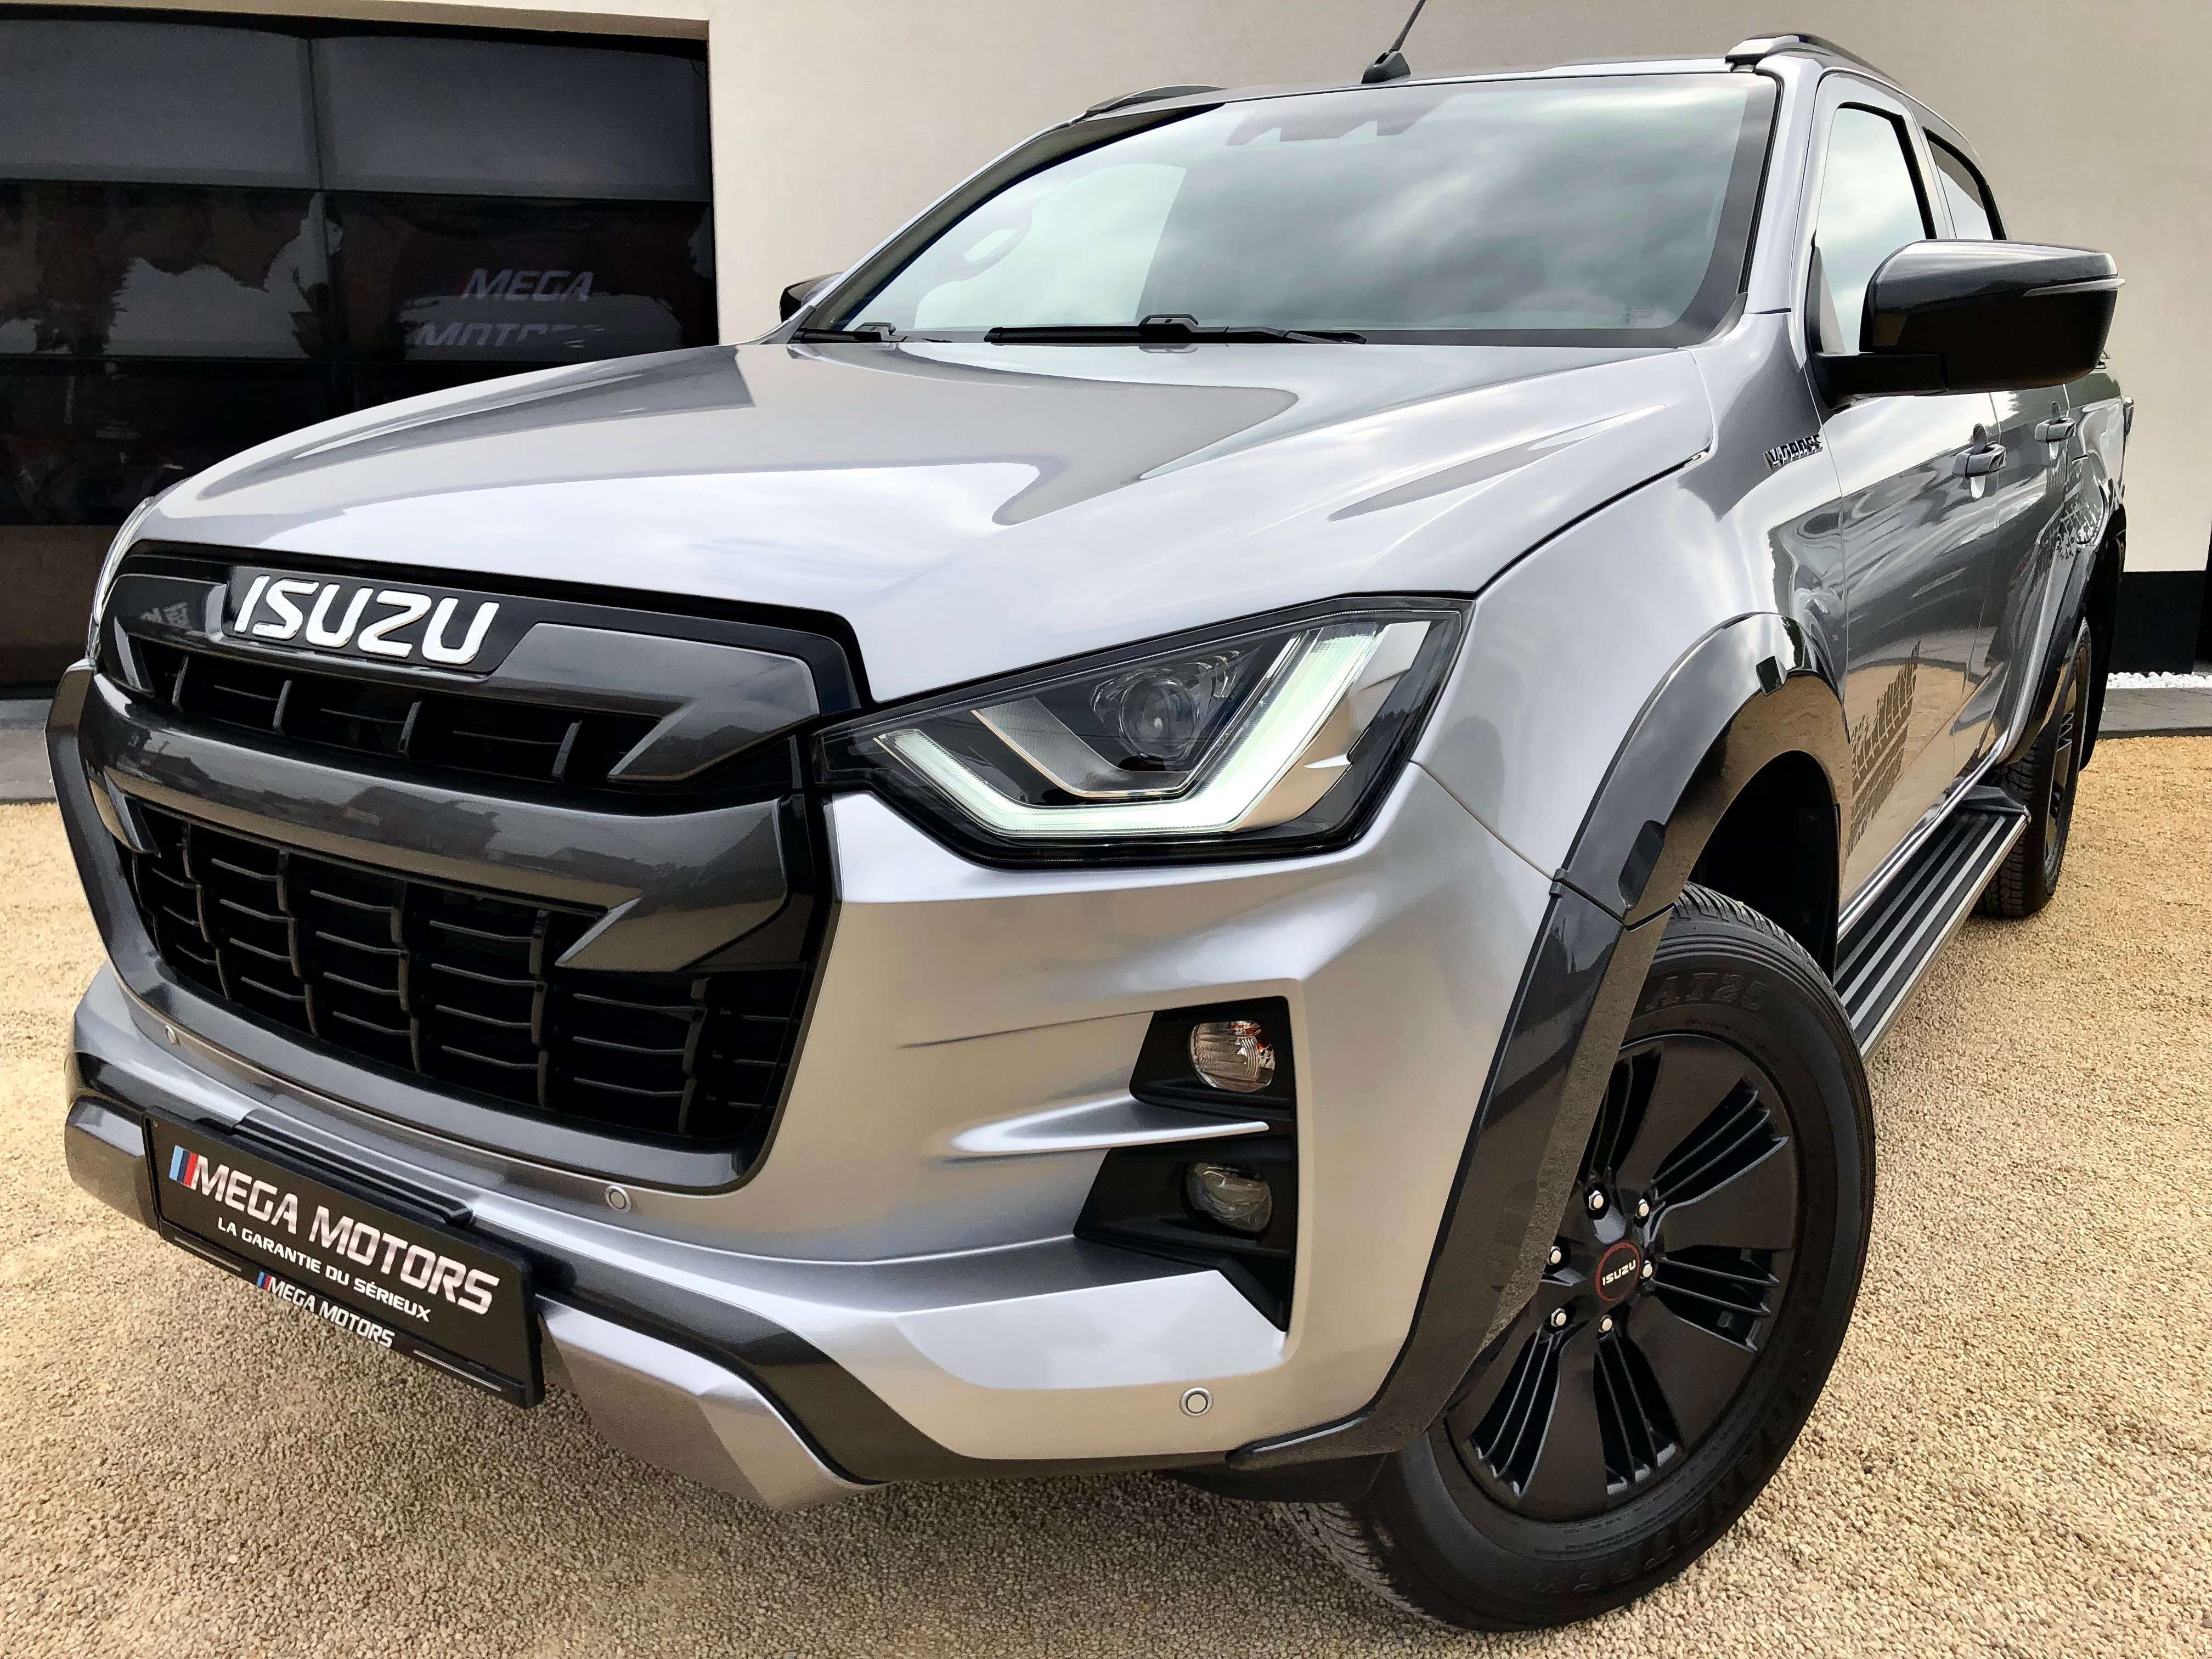 Isuzu D-Max Off-Road/Pick-up in Grey used in Sambreville (Belgique) for € 44,900.-